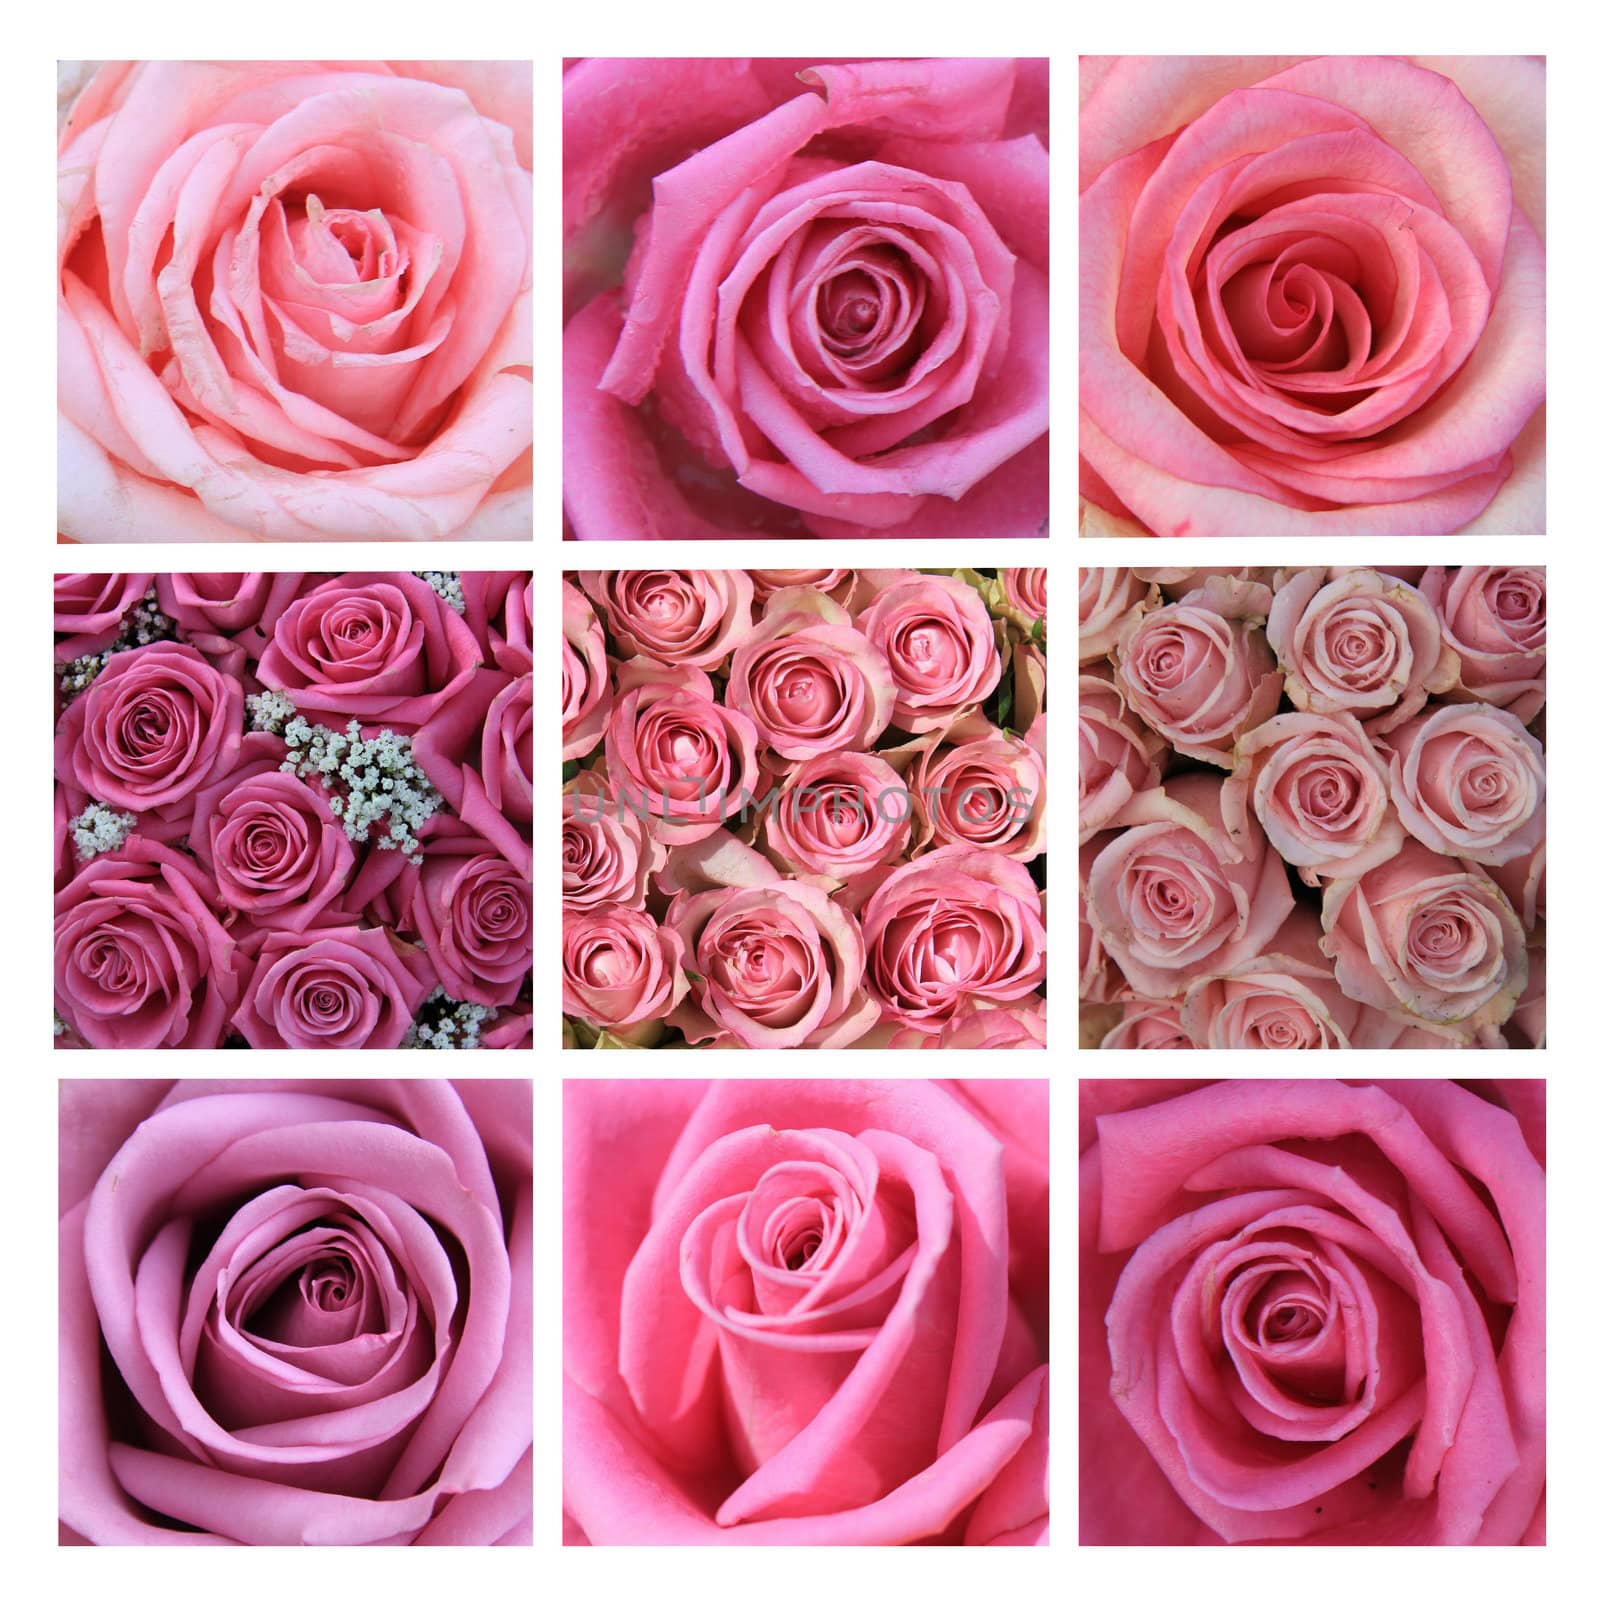 Pink rose collage by studioportosabbia